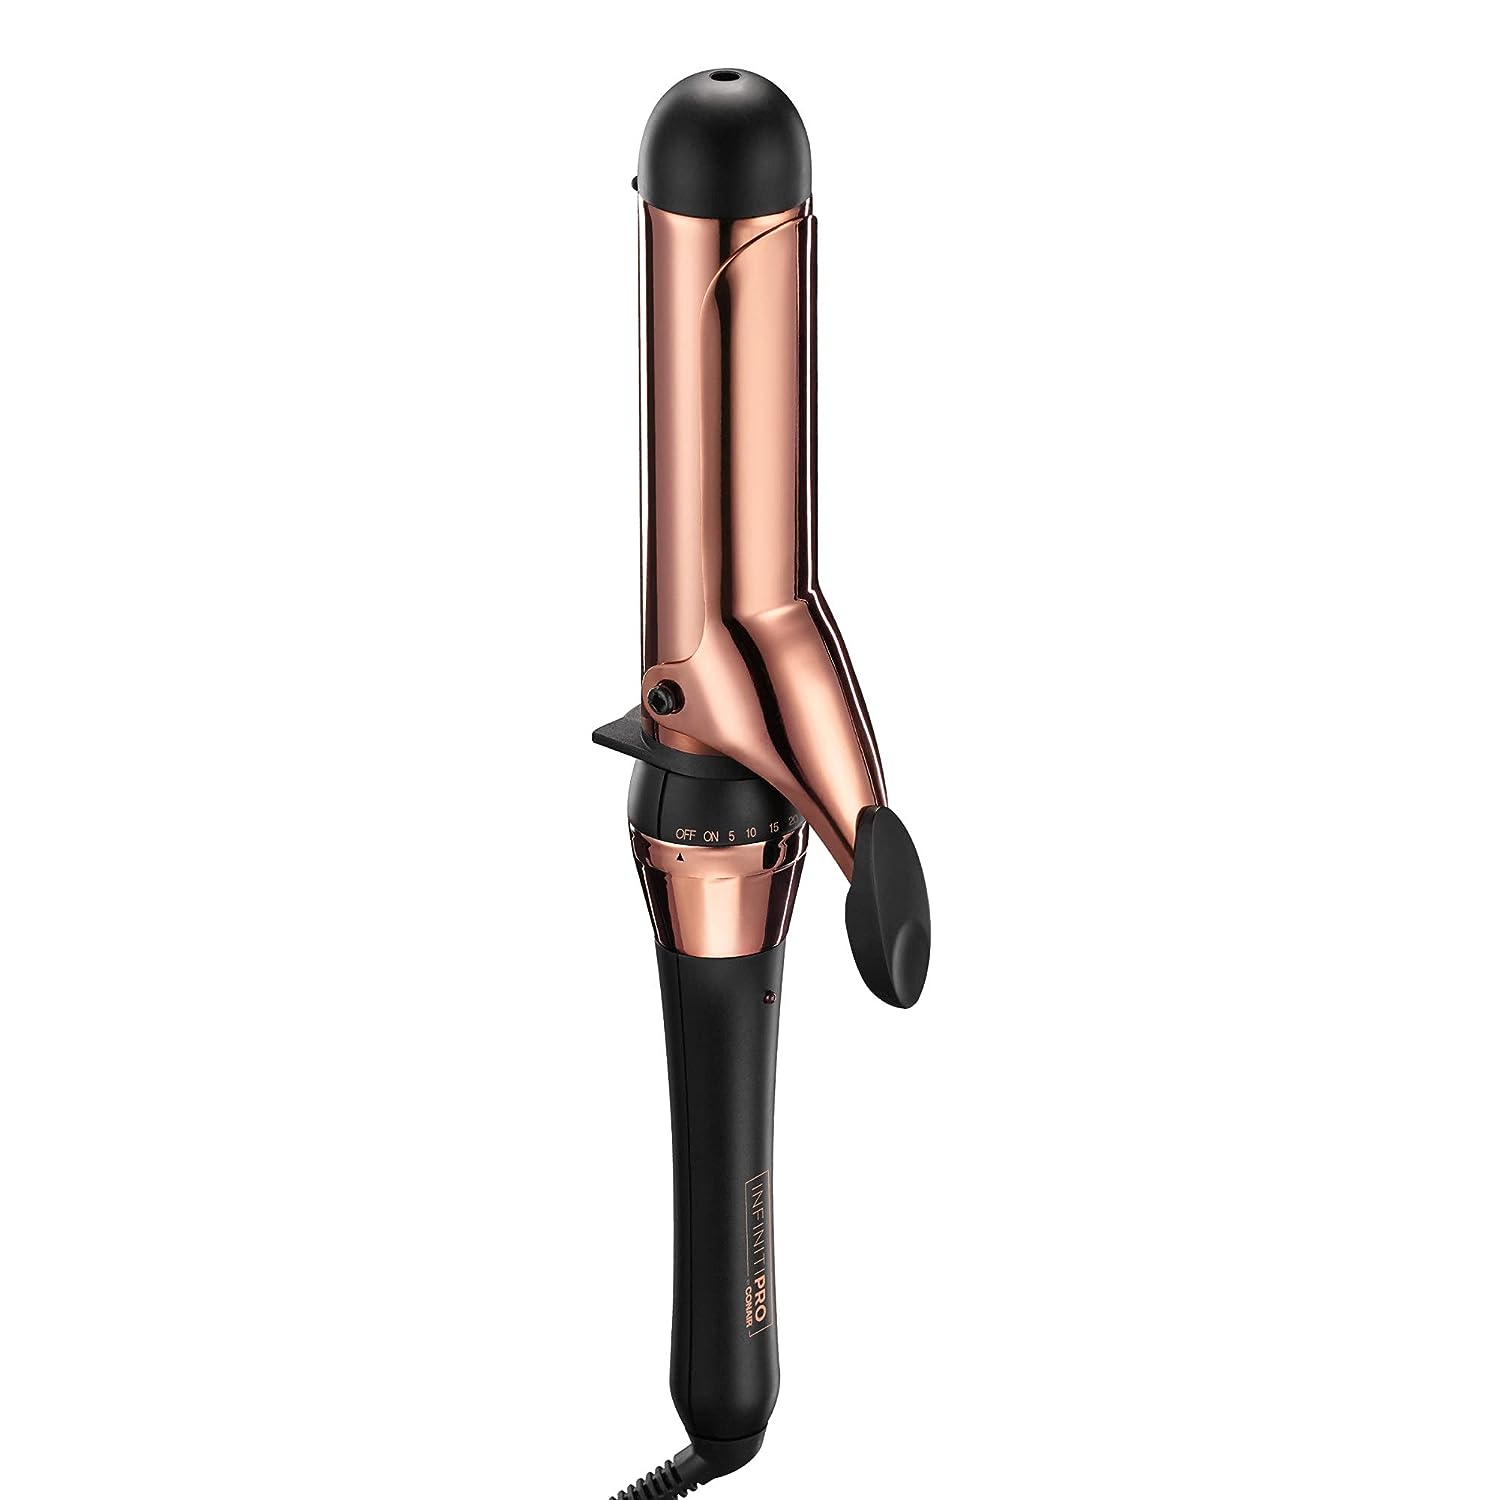 INFINITIPRO BY CONAIR Rose Gold Titanium 1 1/2-Inch [...]